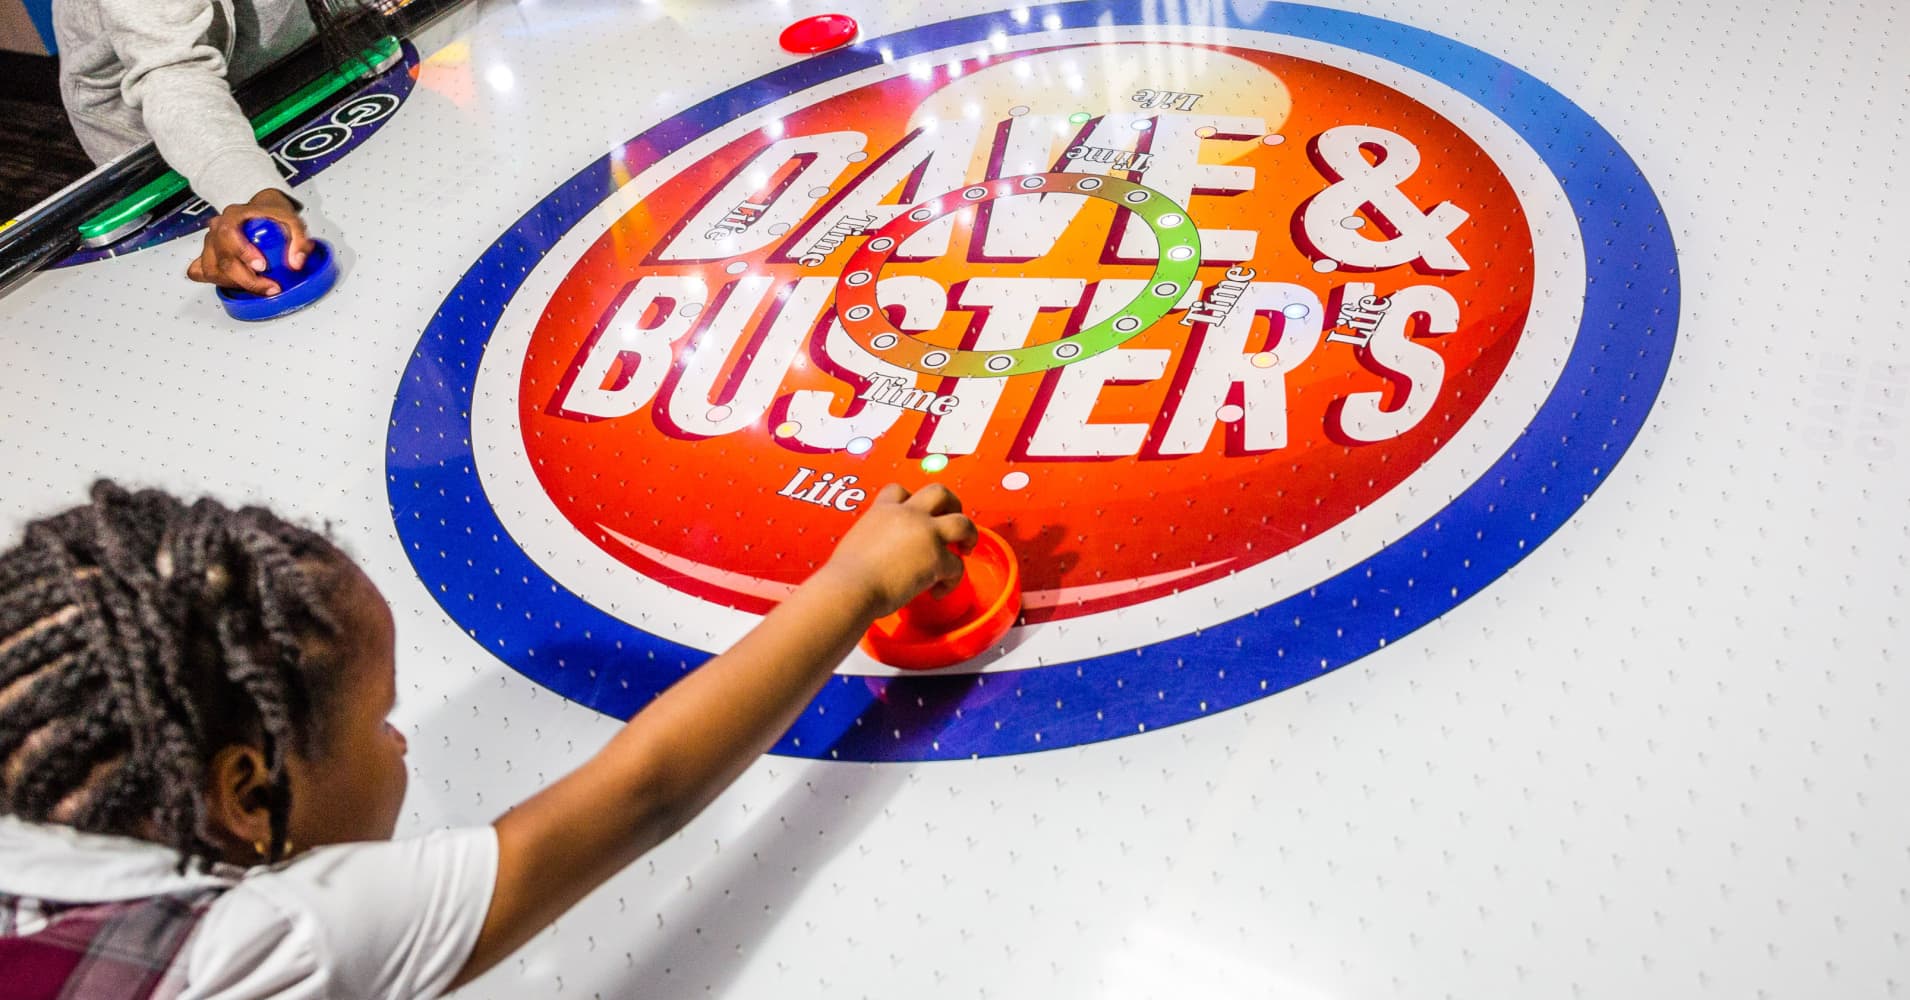 groupon deals for dave and busters